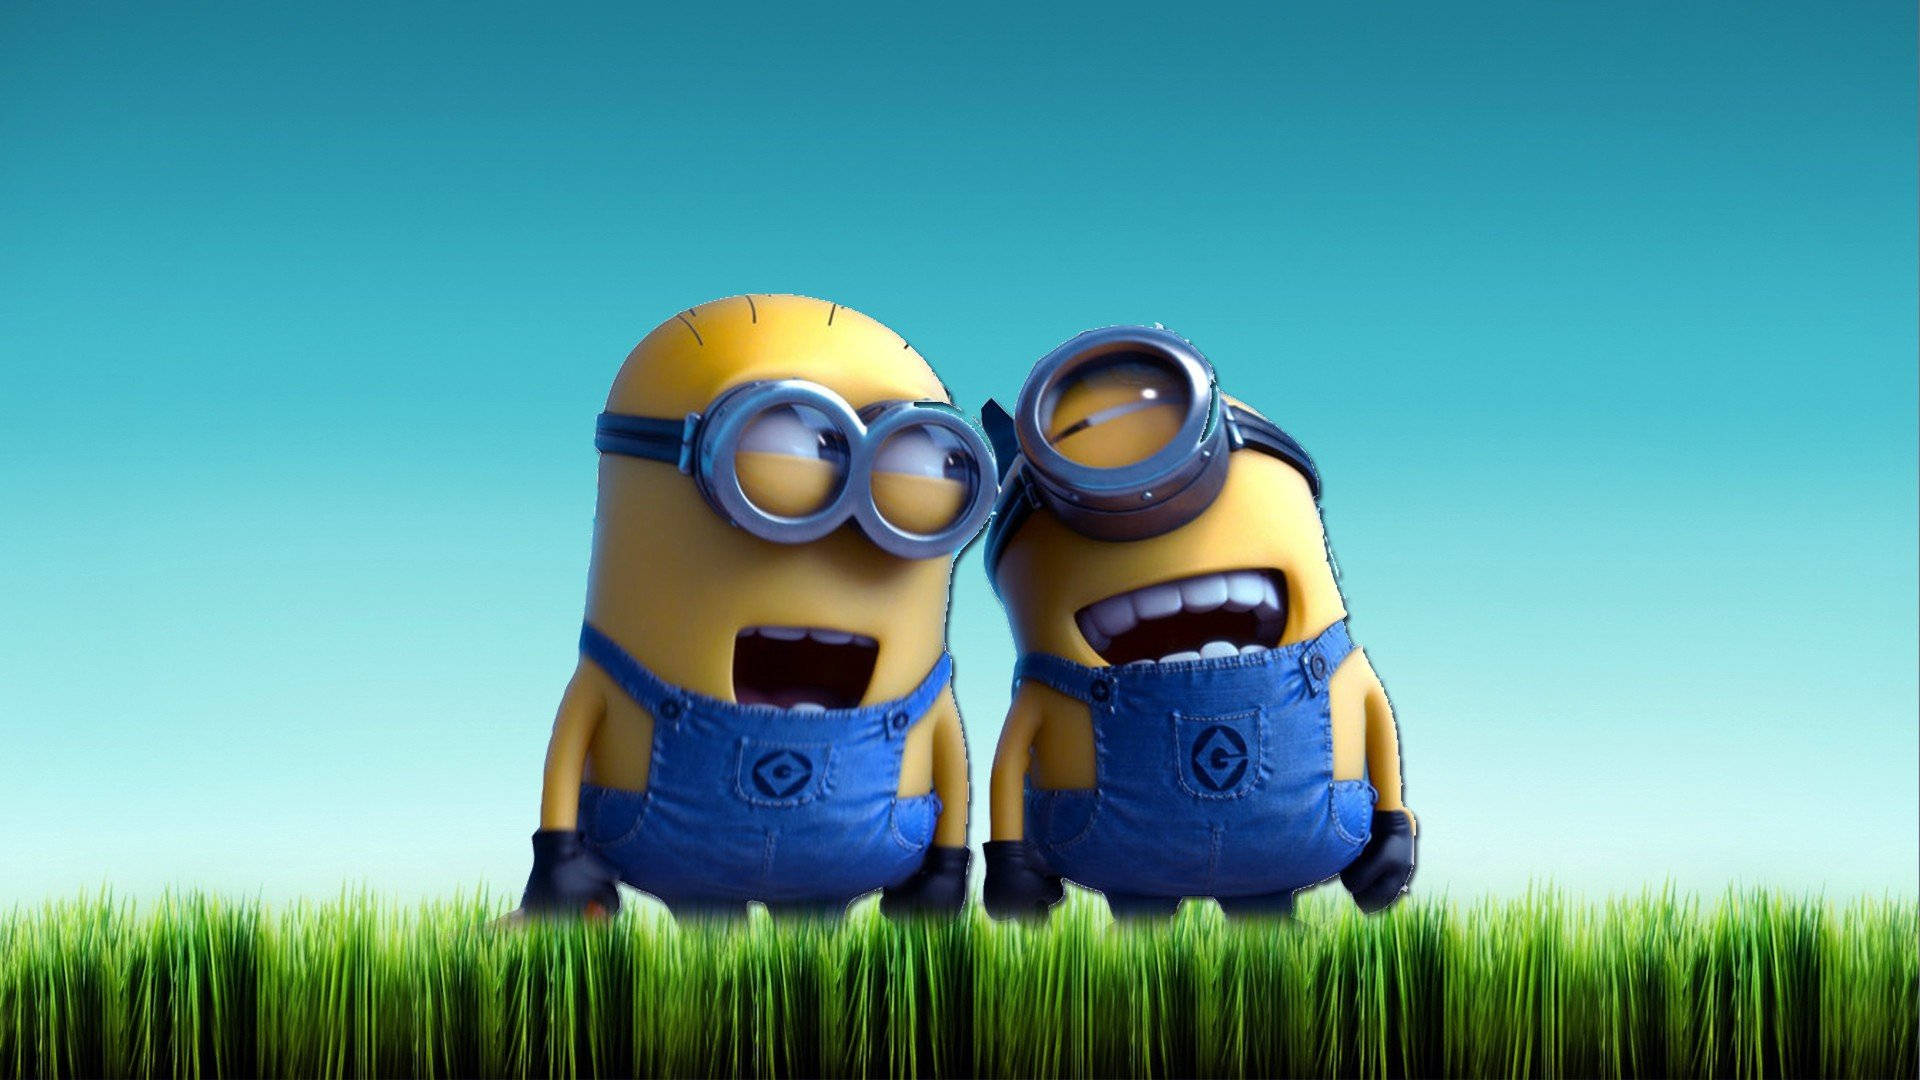 Happy Minions In Grass Background